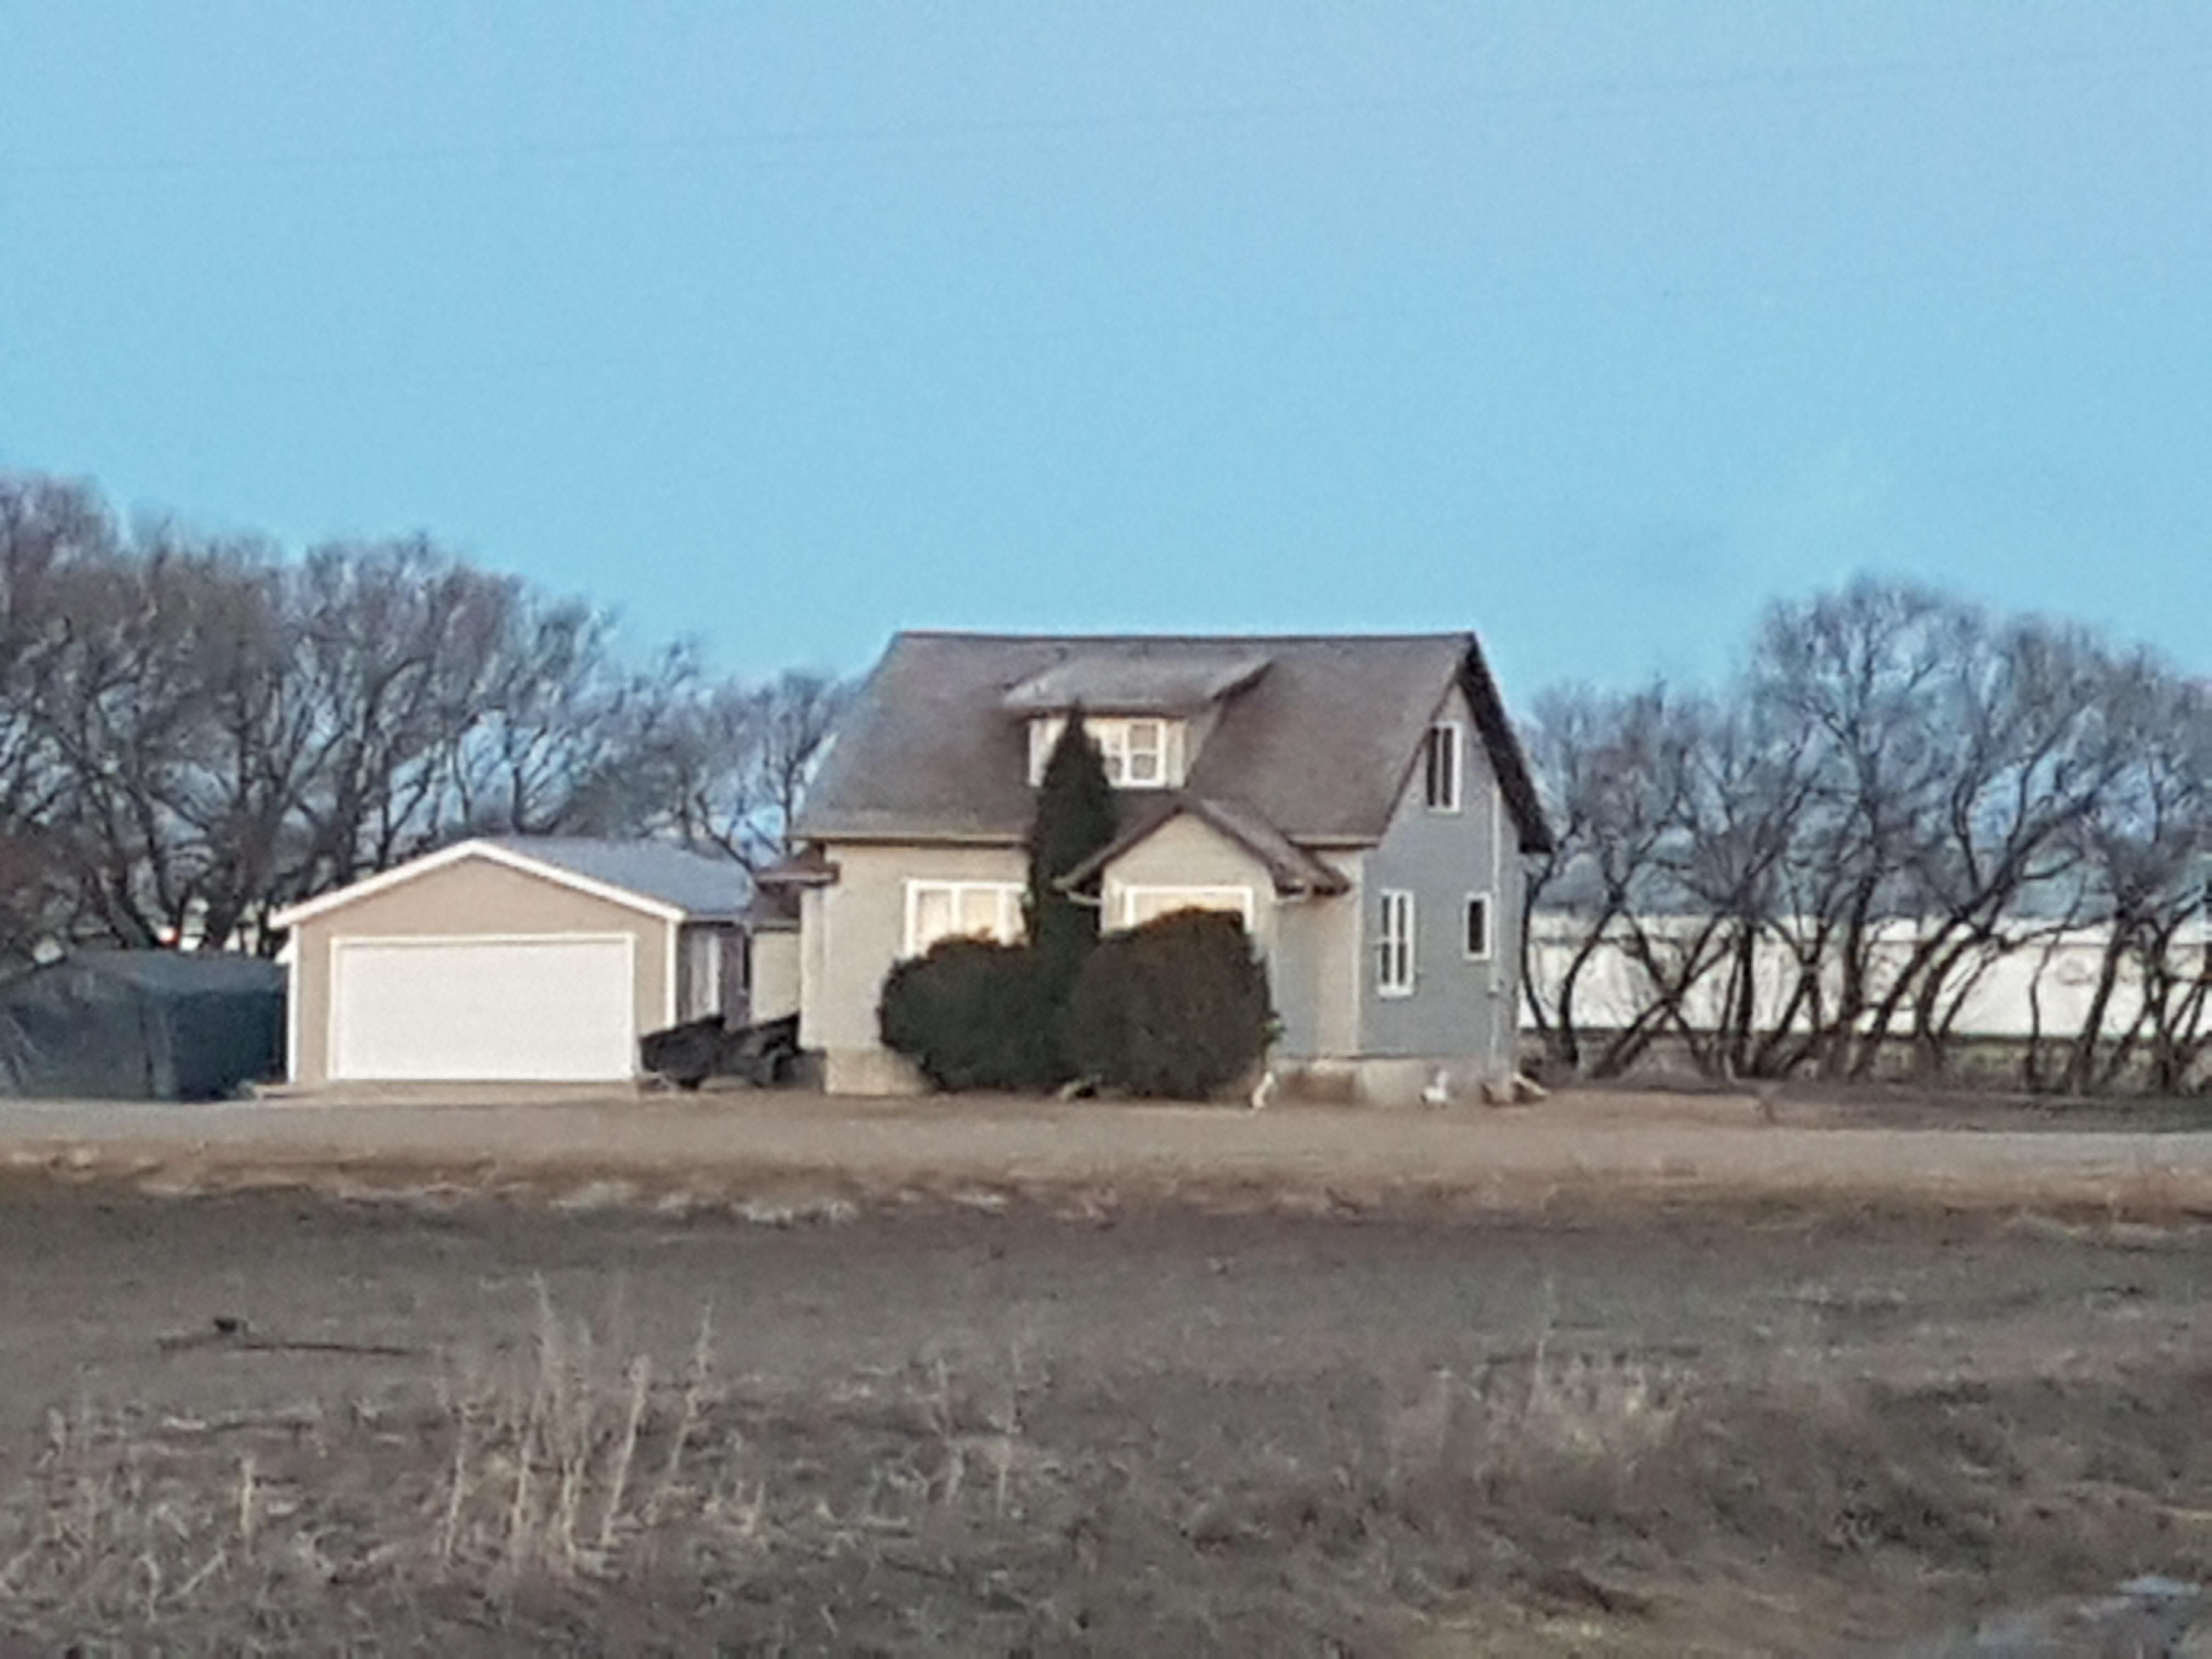 I've driven past this house everyday for the past 6 years and only noticed this today.